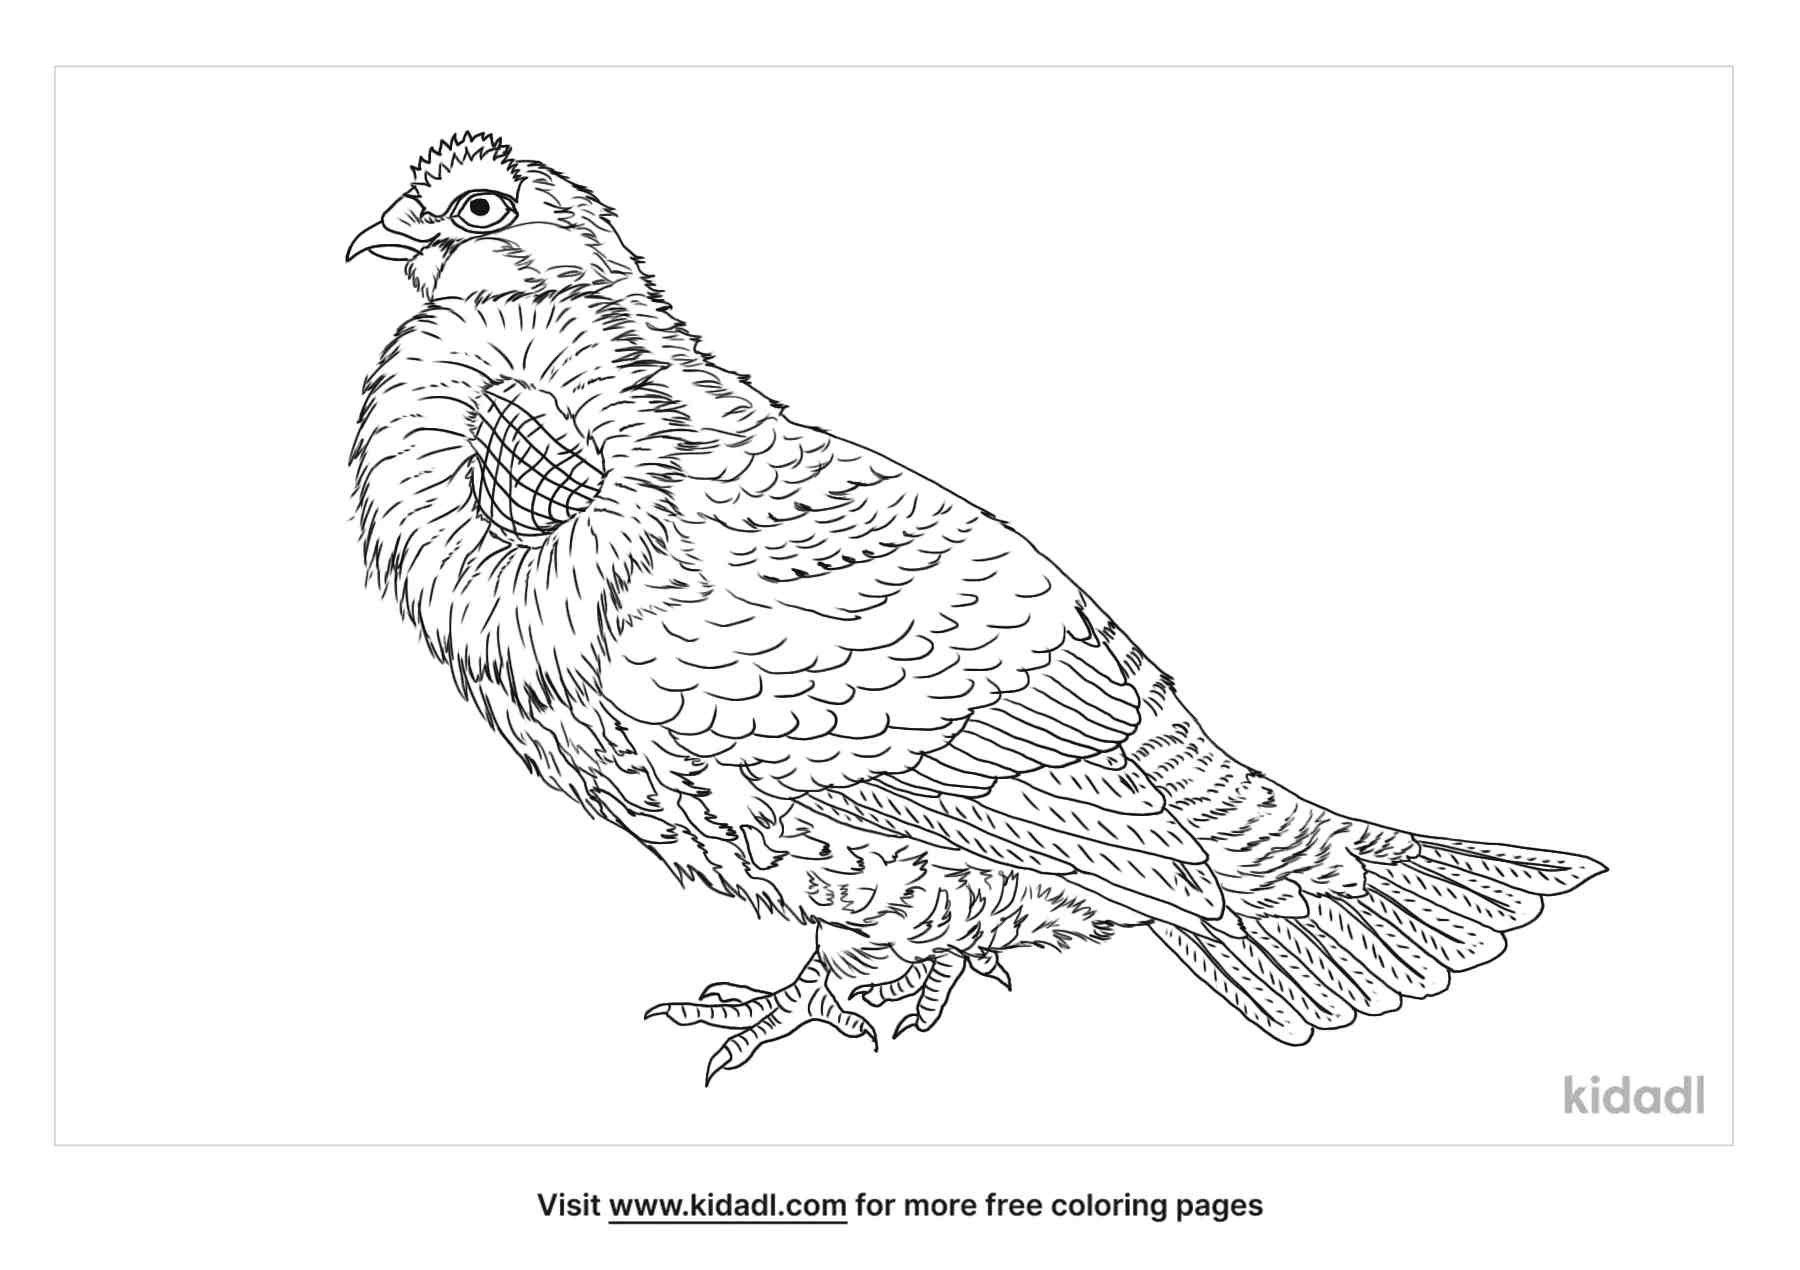 coloring page containing blue grouse